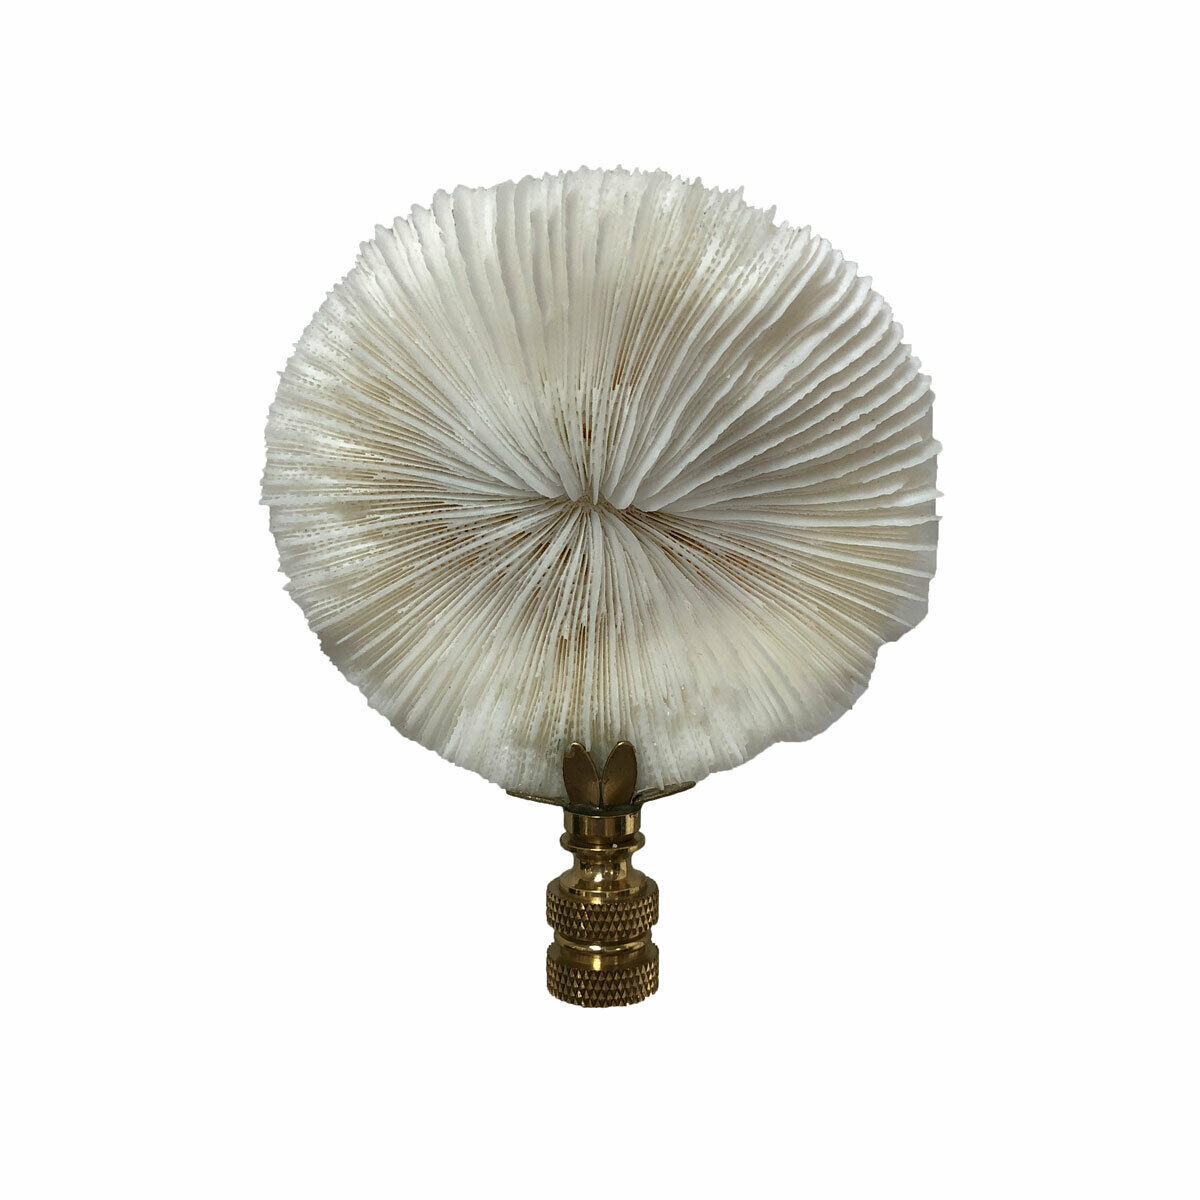 Natural Coral Lamp Finial, Nautical White Mushroom Coral on Polished Brass Base